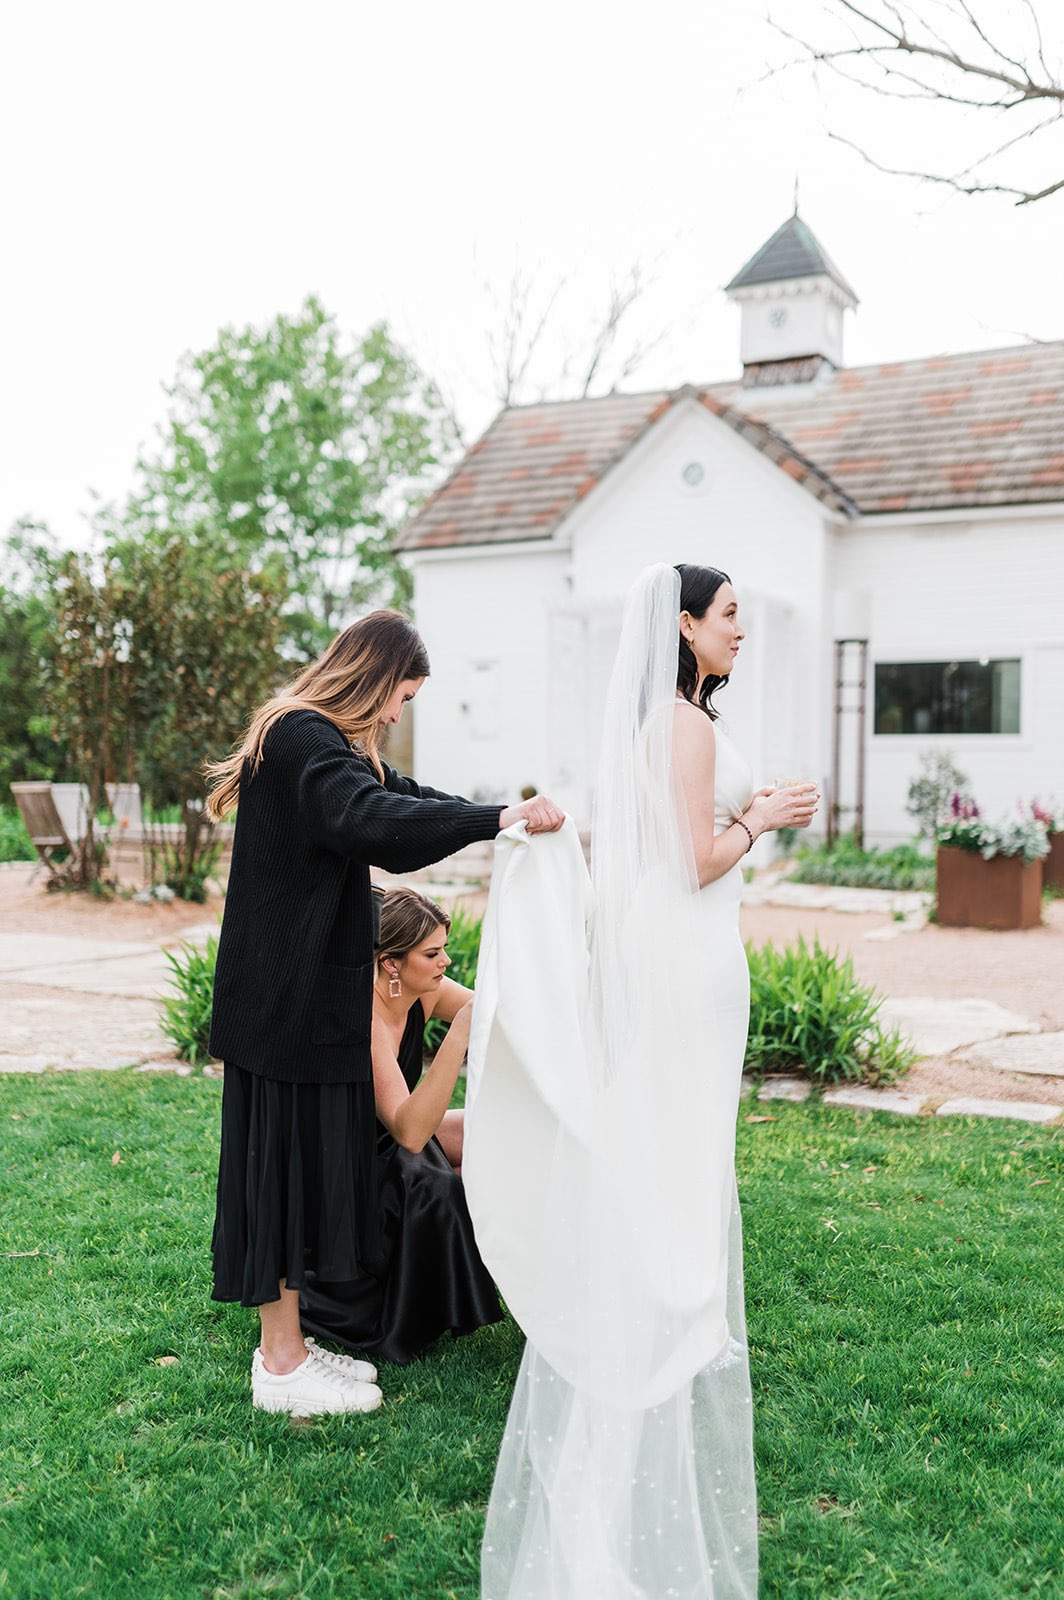 Wedding planner helping the maid of honor bustle the bride's dress